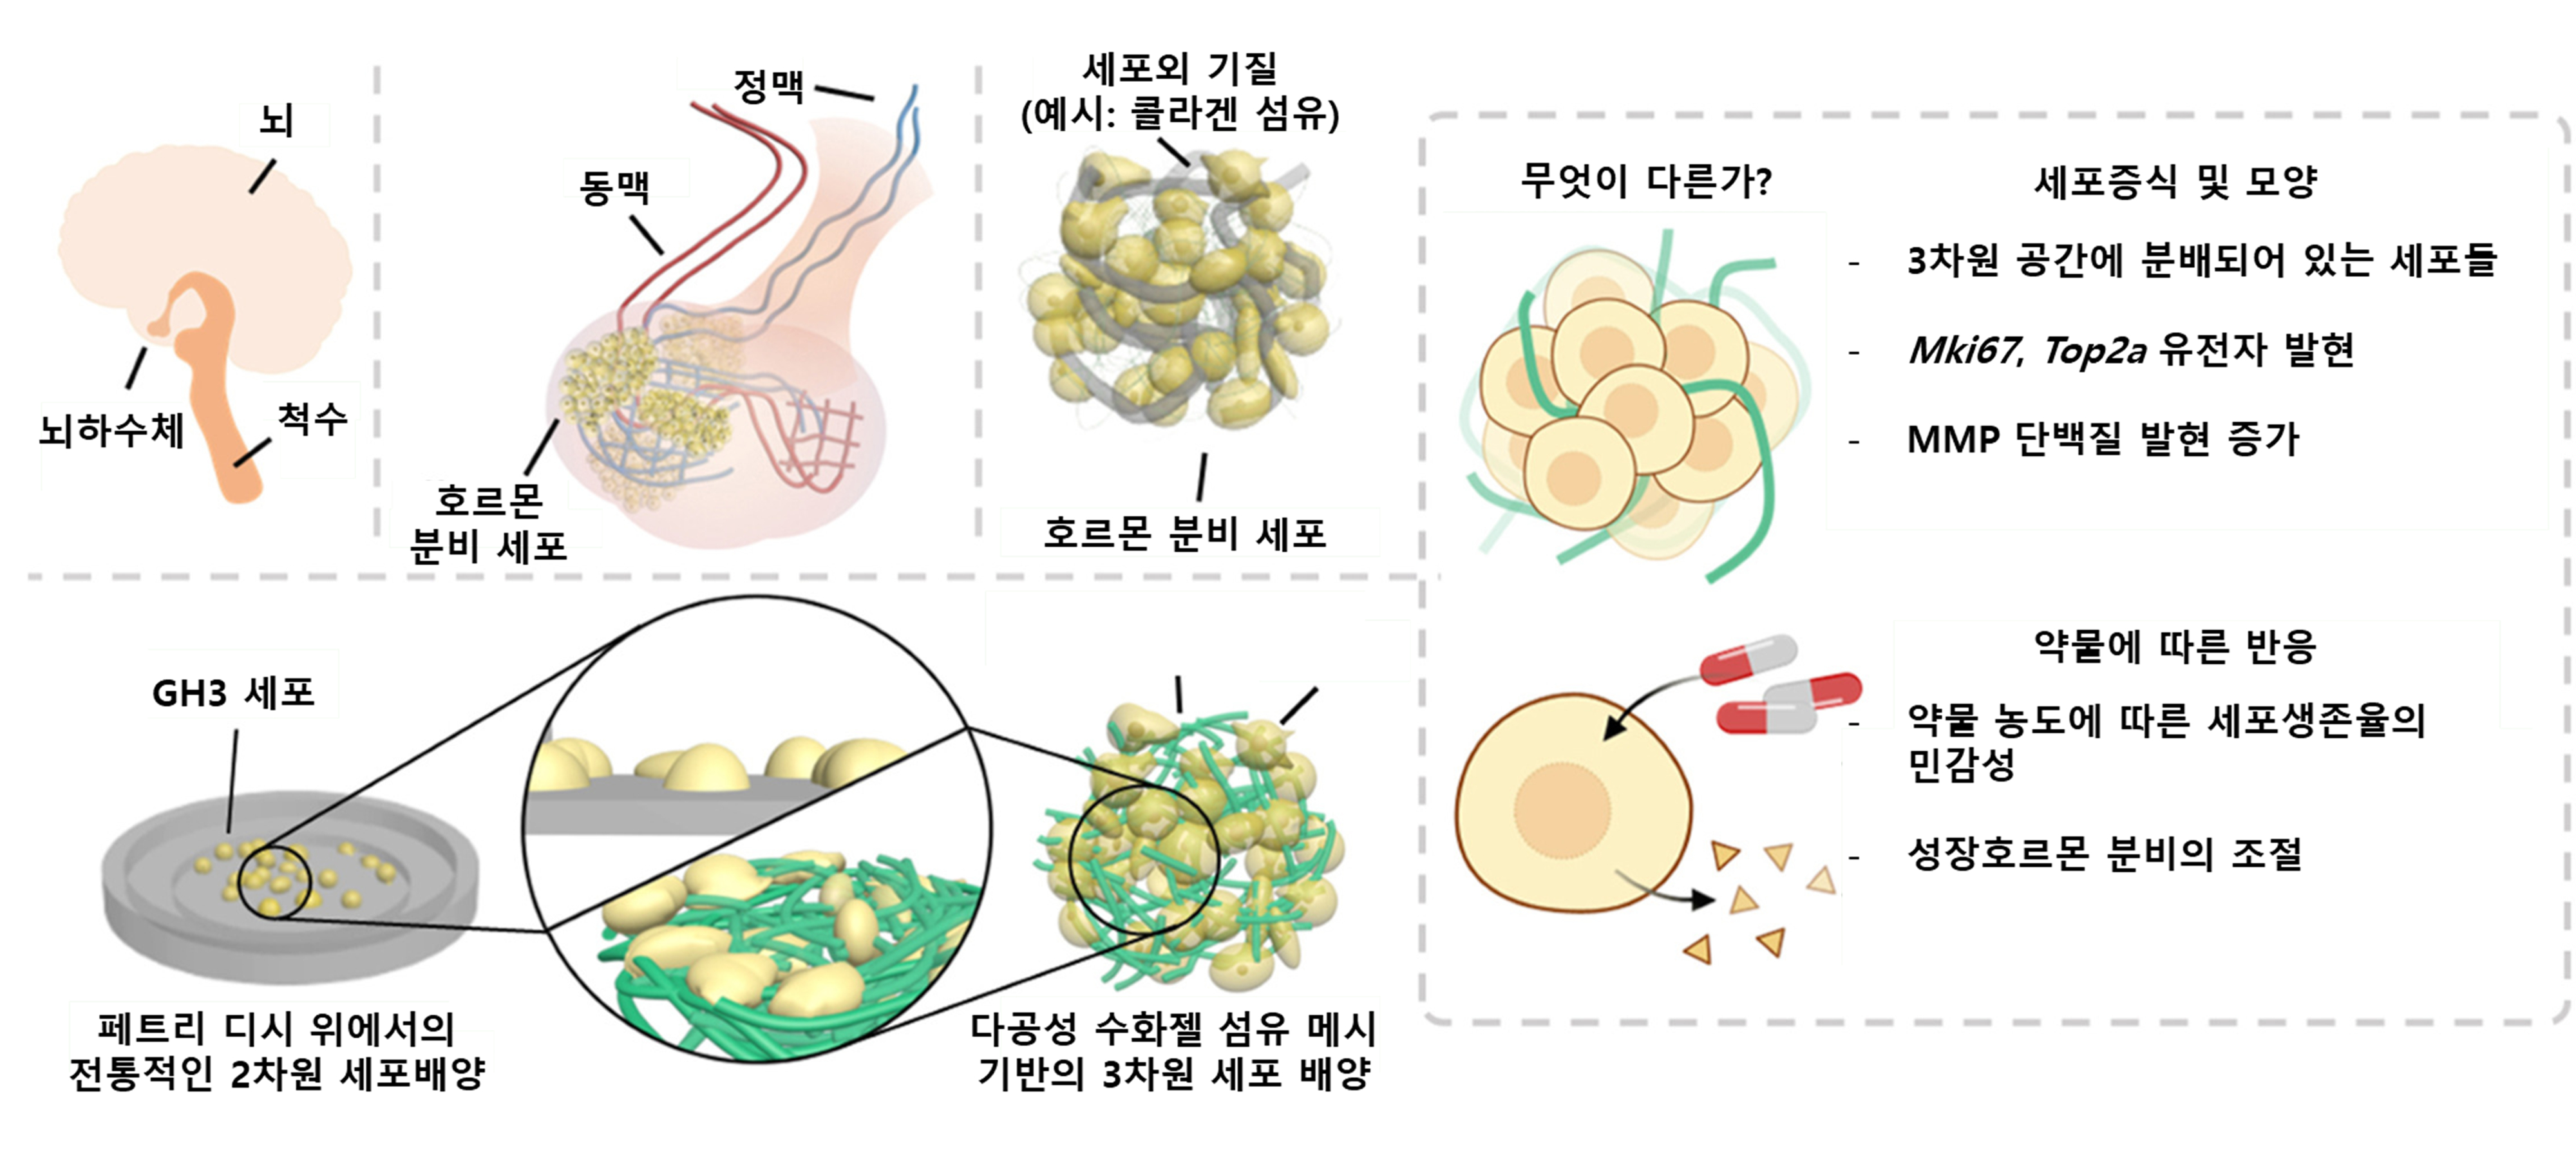 The joint research team of Professors Chang-Myung Oh and Myung-Han Yoon develops a pituitary tumor model for the treatment of acromegaly... Laying the foundation for research on non-surgical drug treatments 이미지